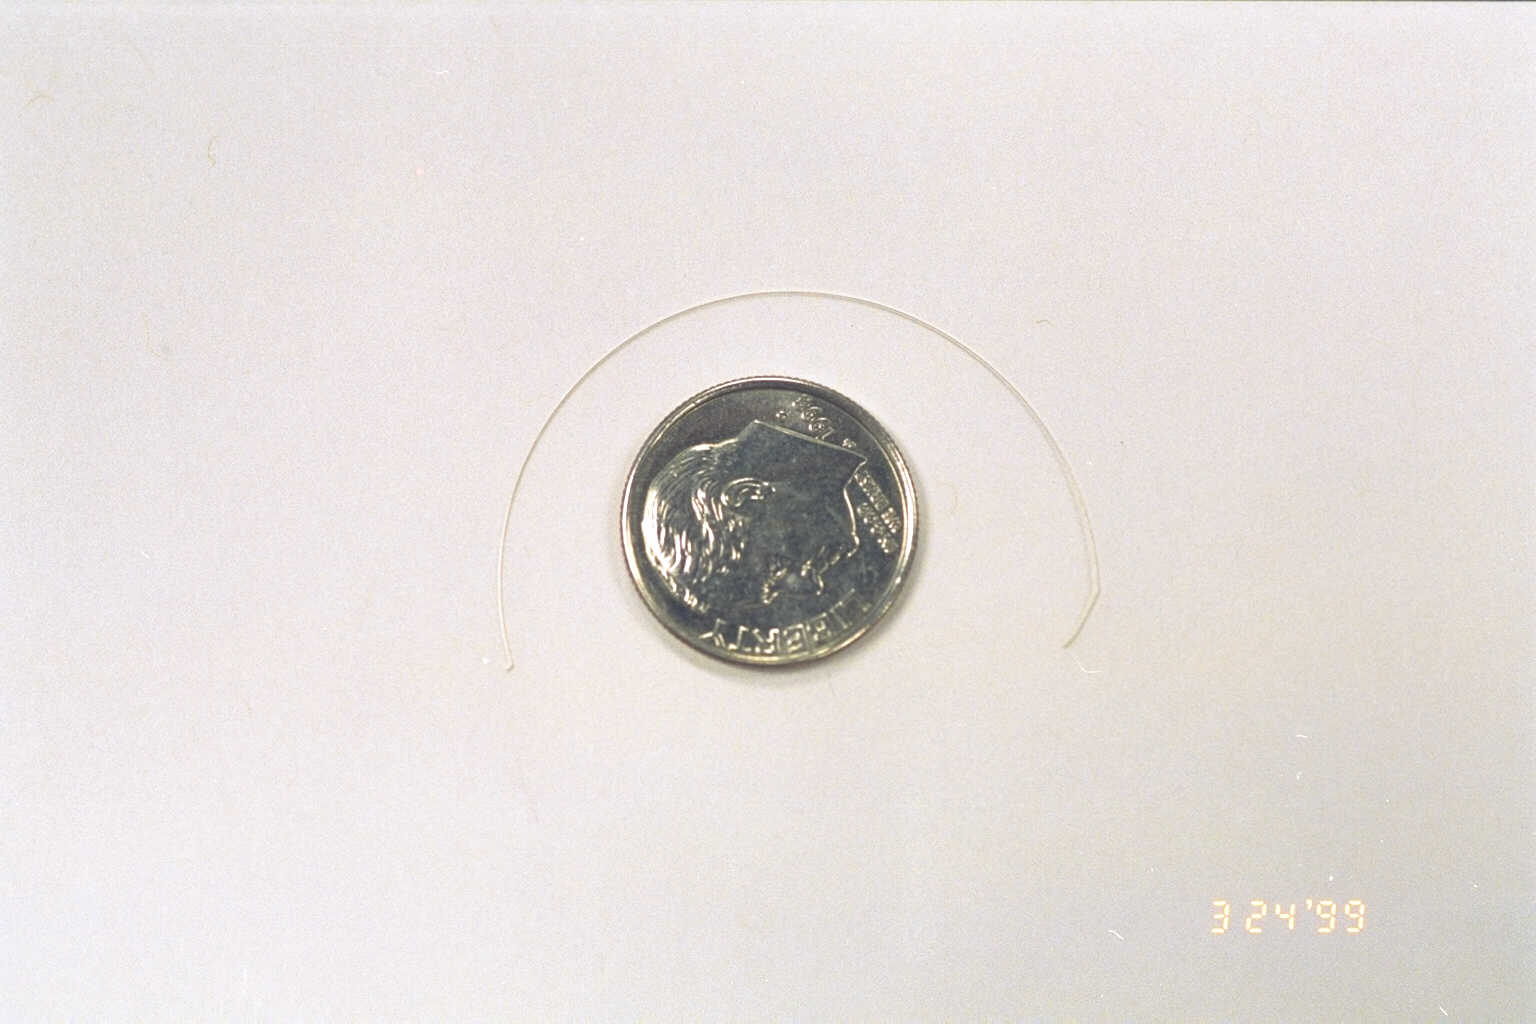 A hair-thin wire laying above a dime